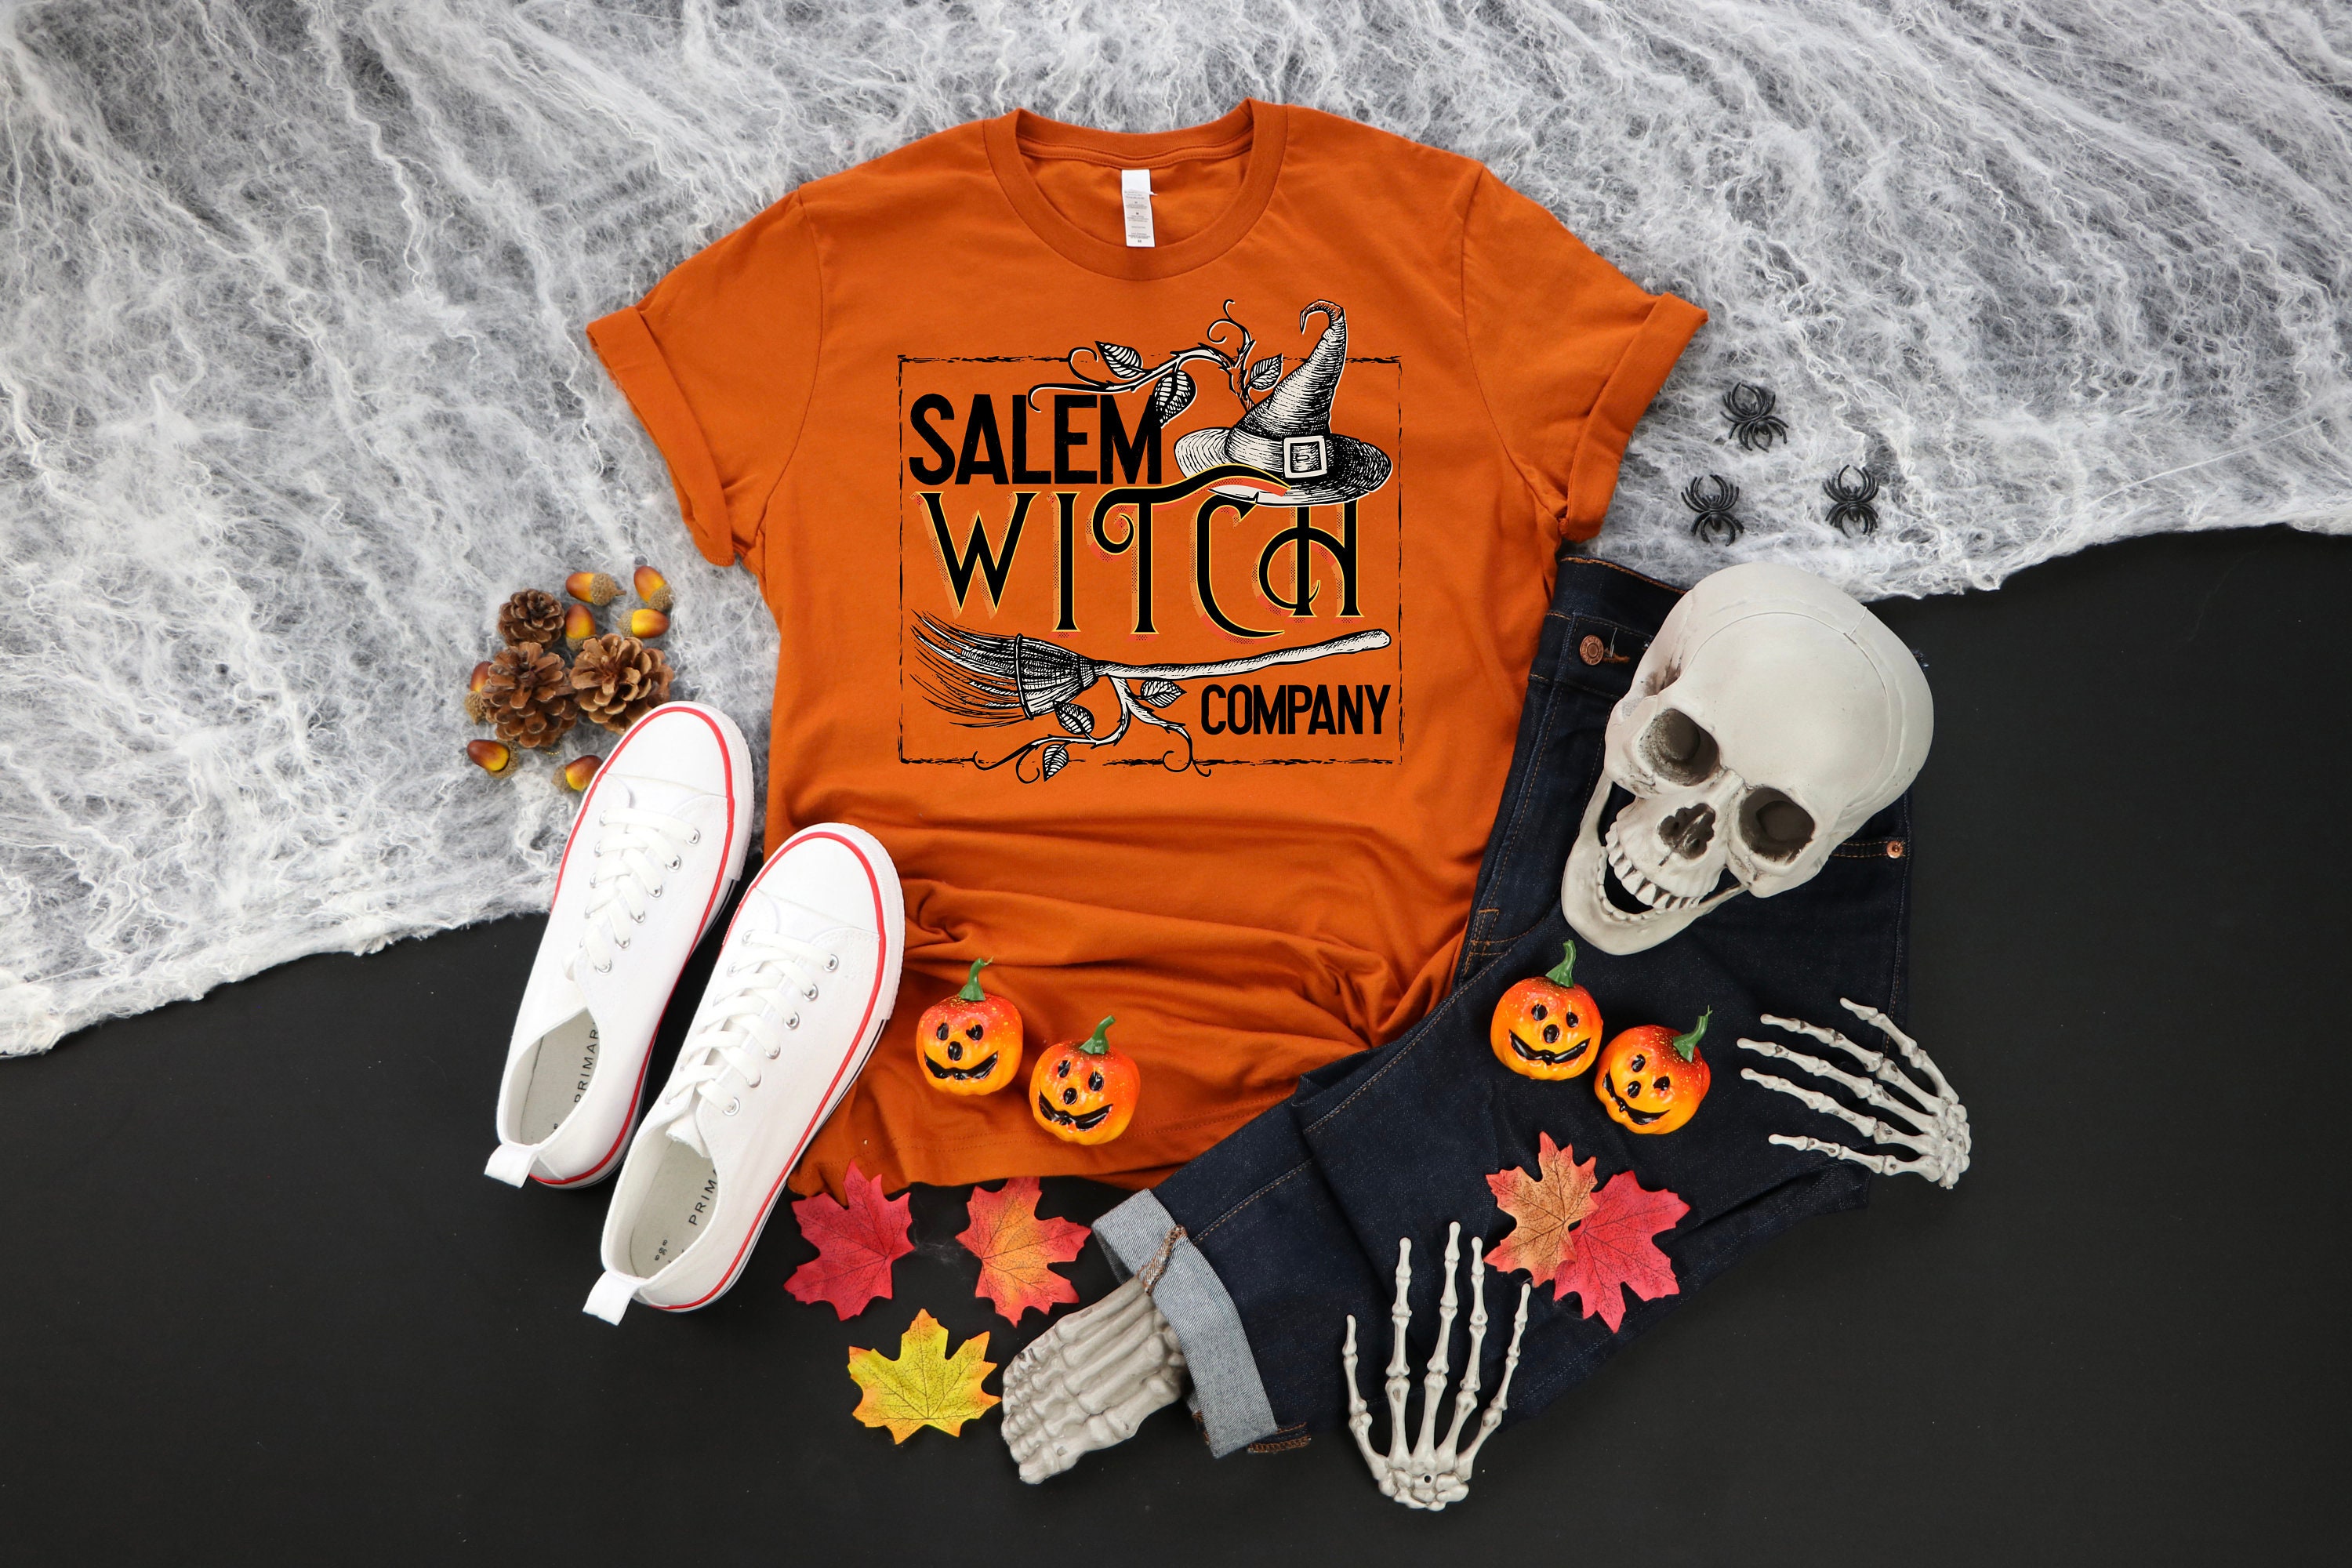 Discover Halloween shirt, Salem Witch Company Shirt, Salem Witches